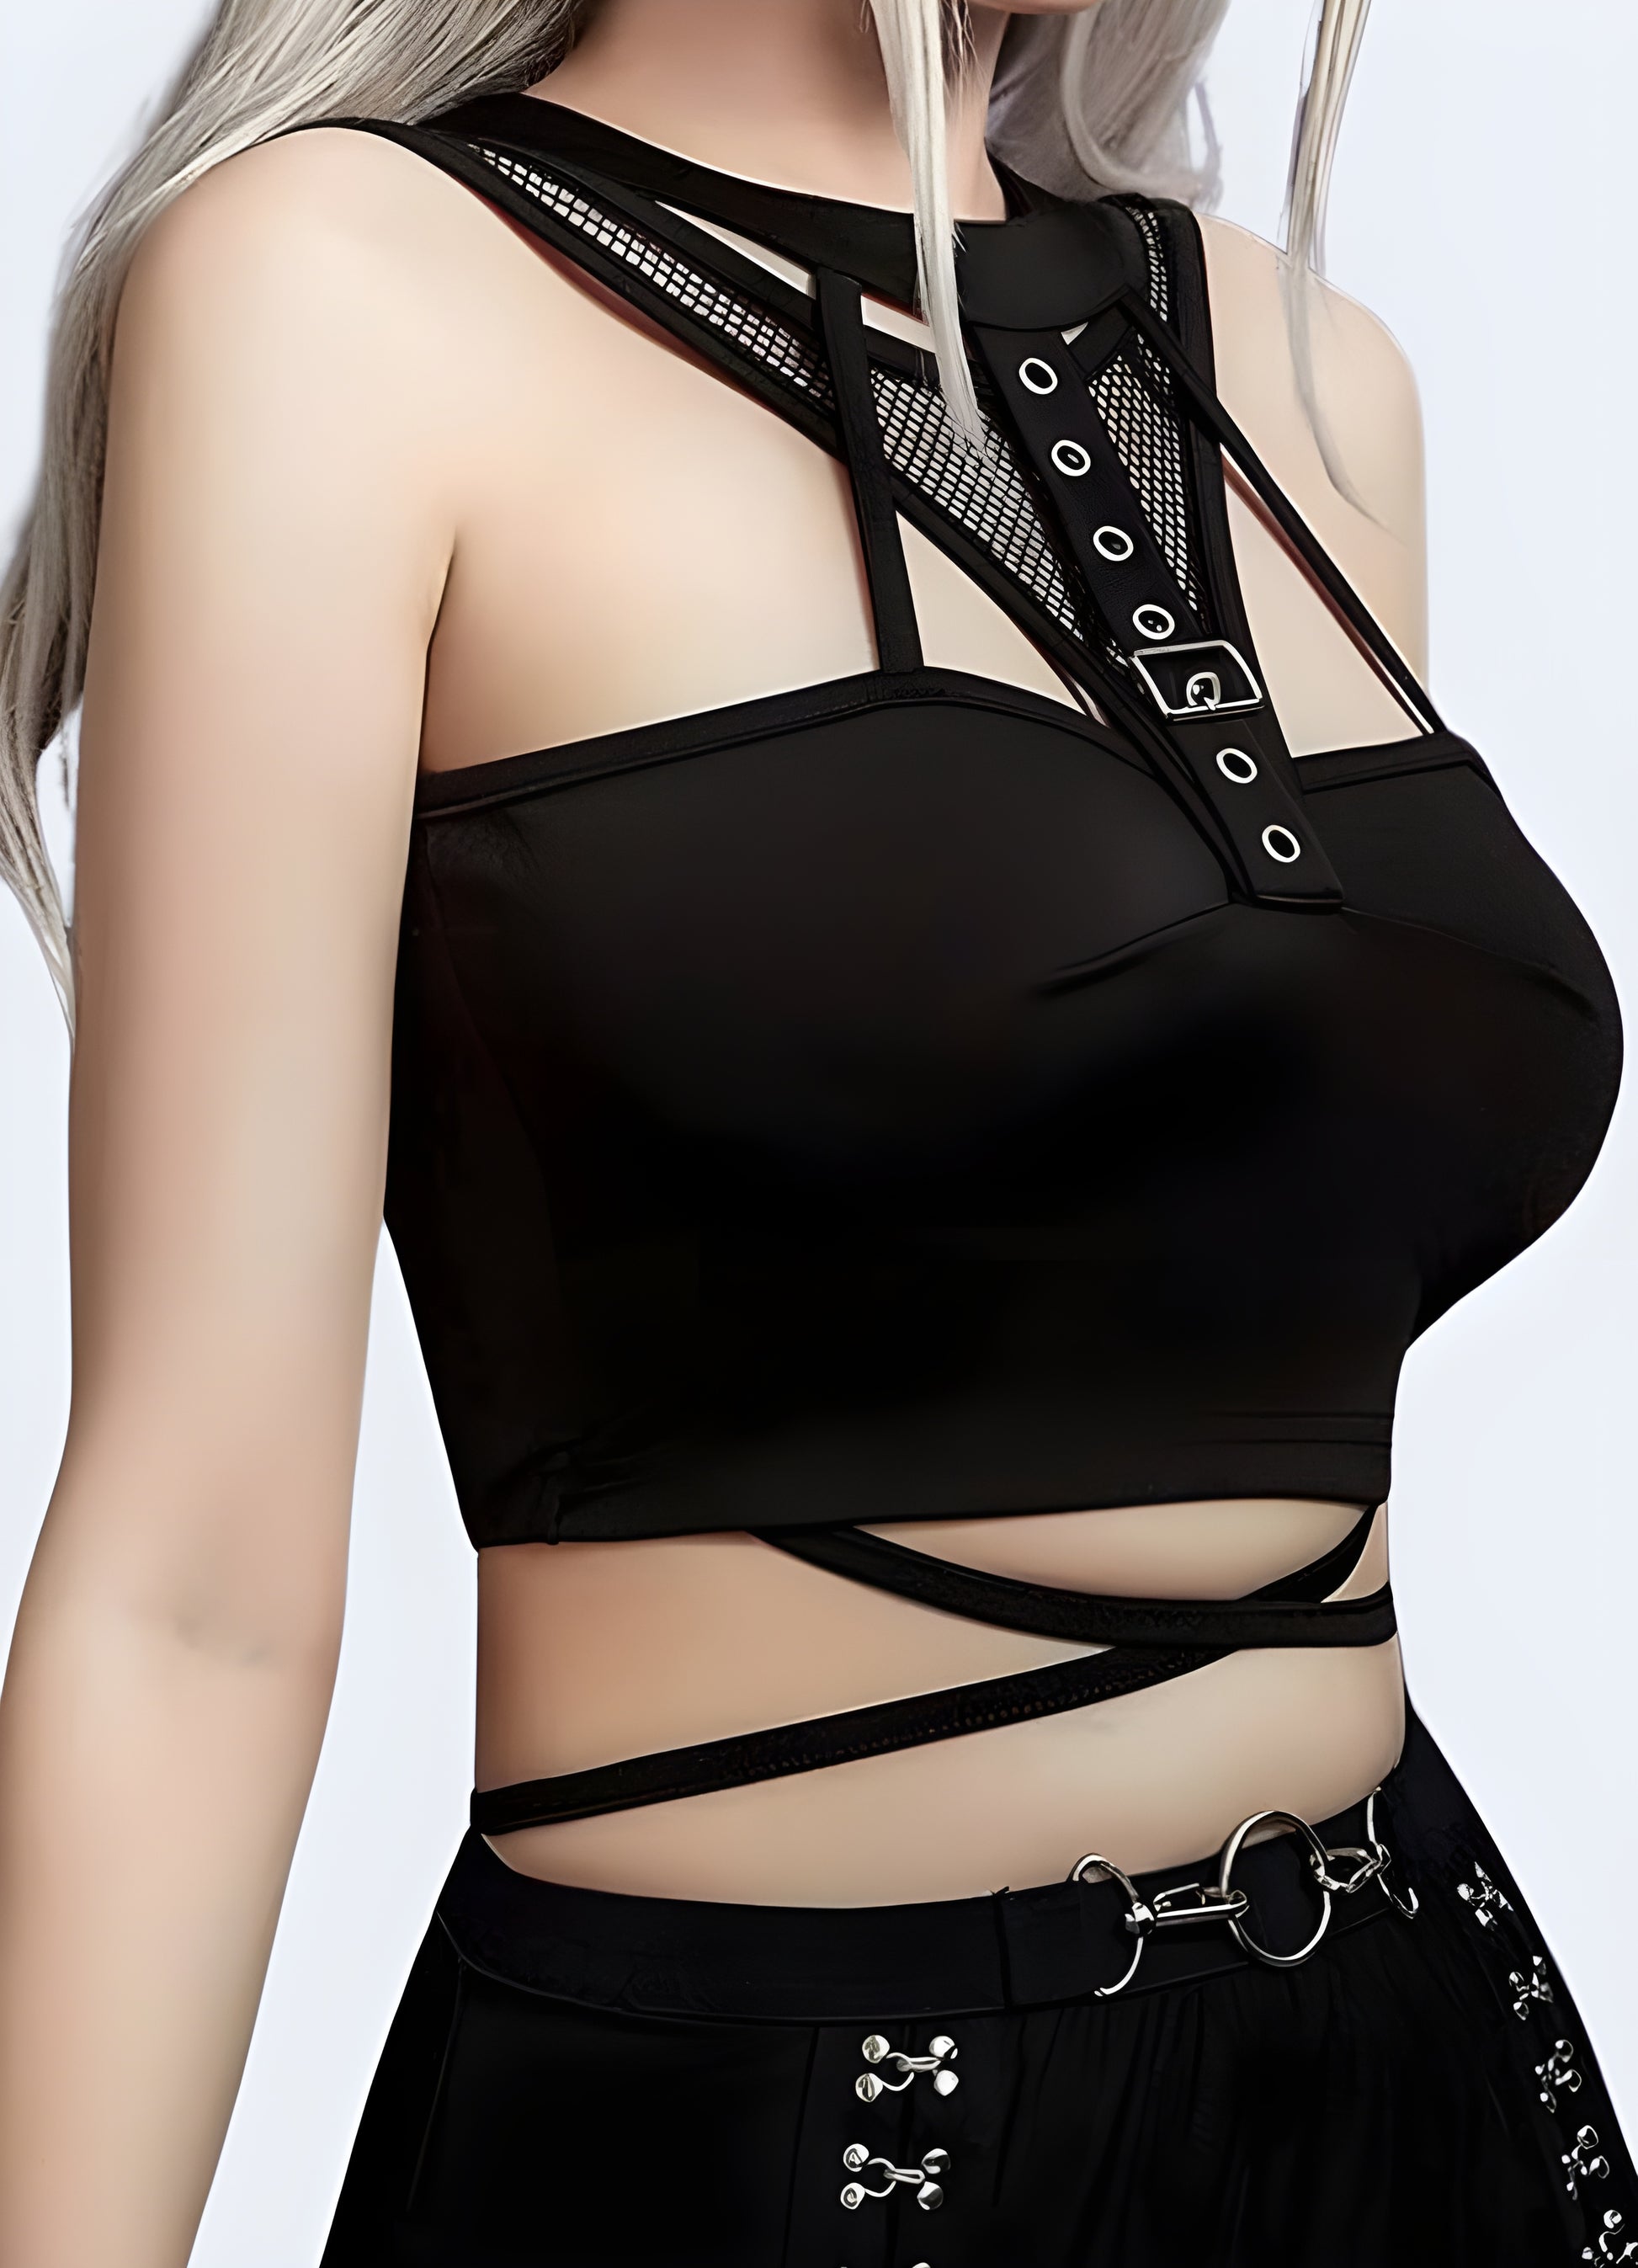 The goth tank top offers an intriguing fusion of gothic and modern styles.